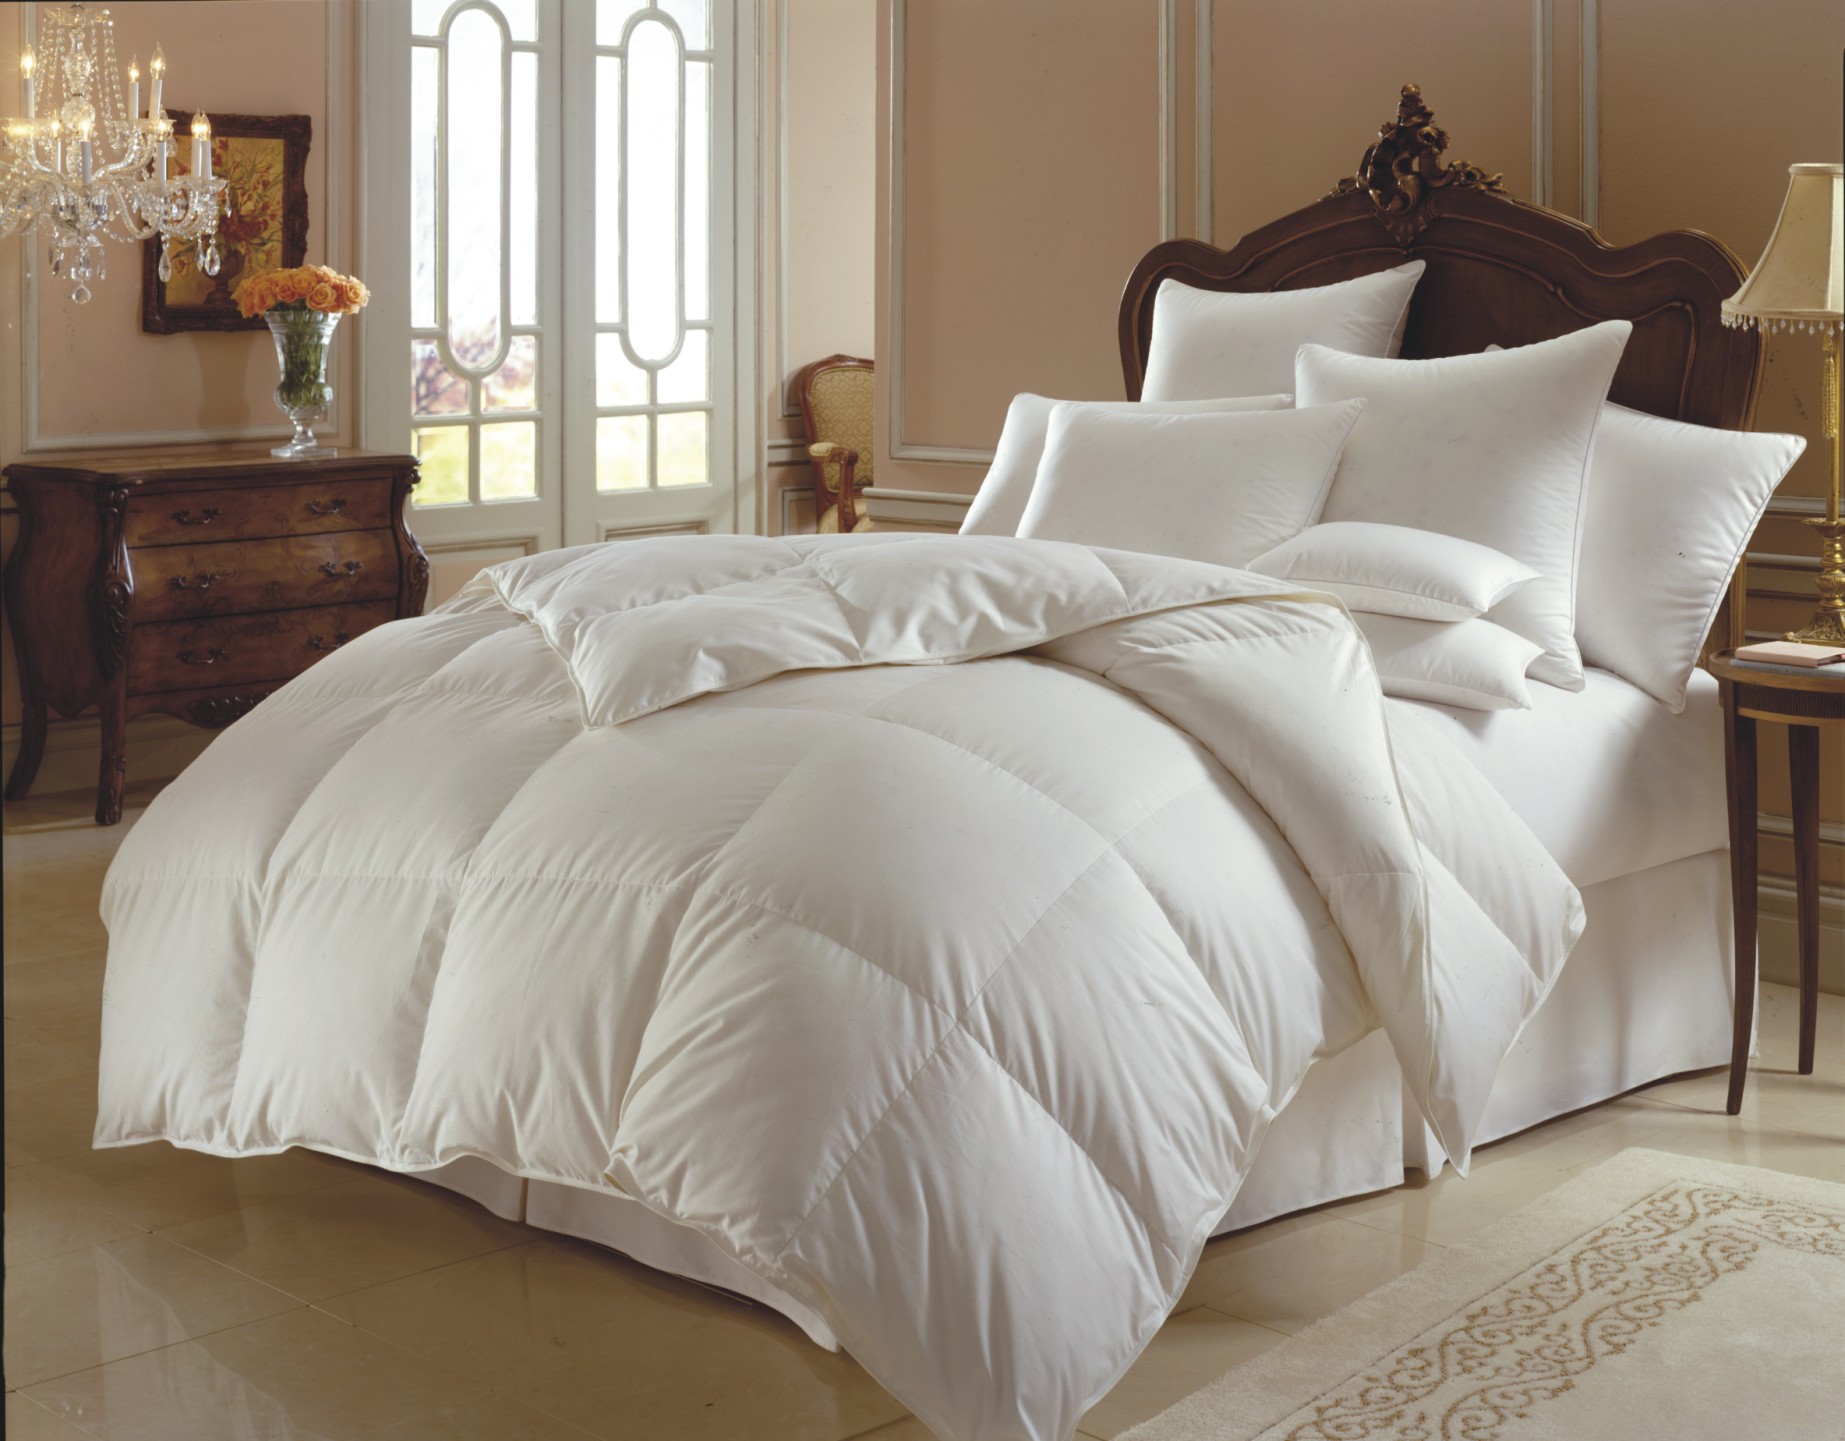 ... European down comforter and down bed comforters are generally on sale